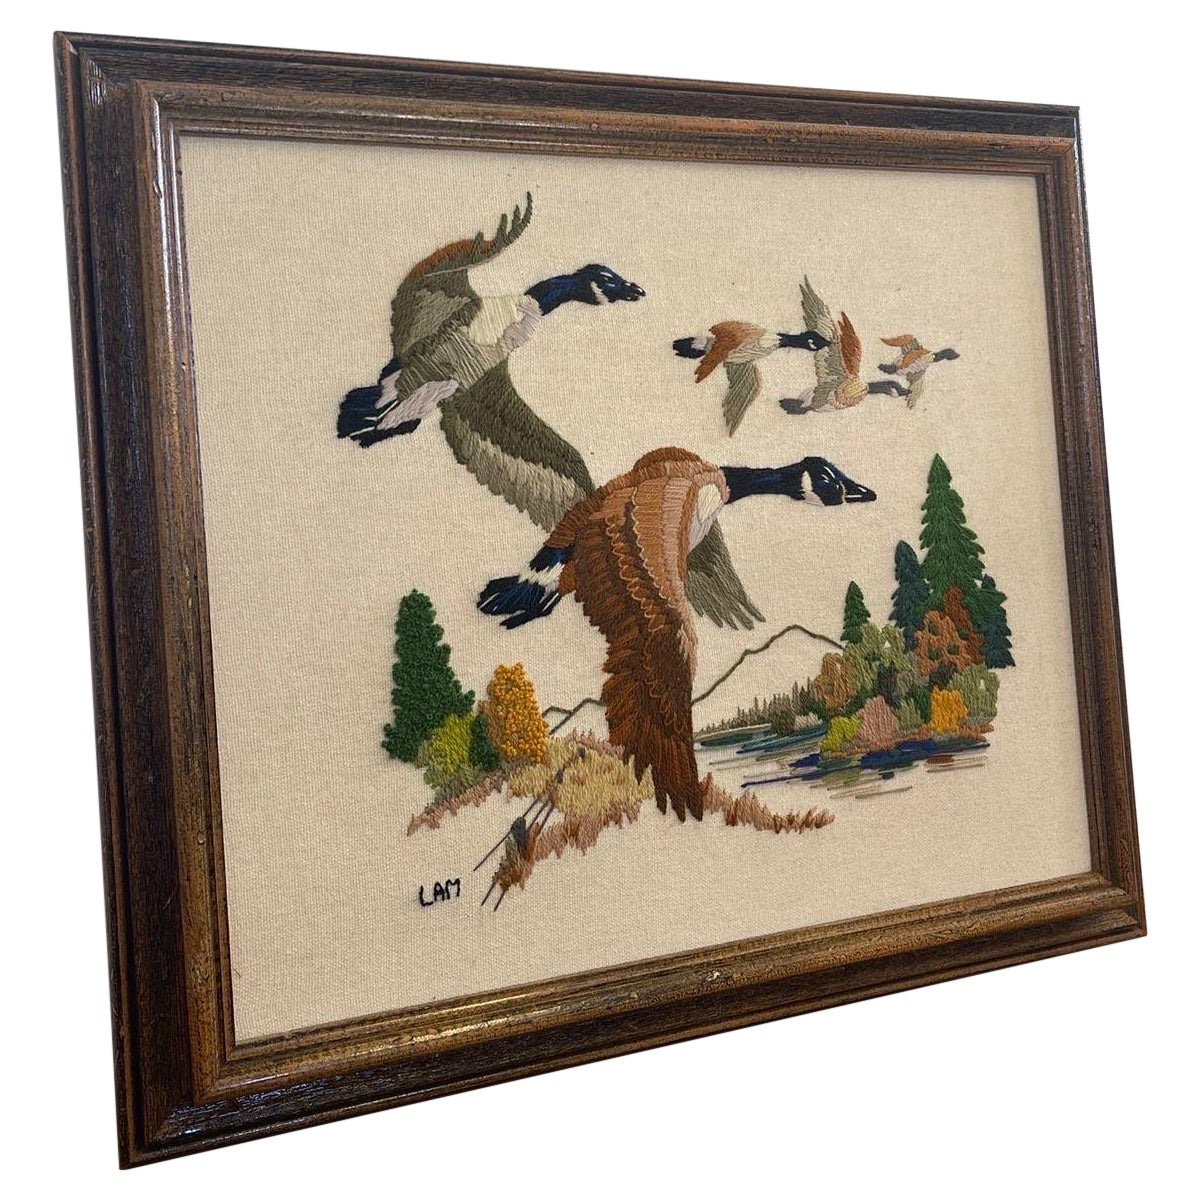 Vintage Handmade Geese Needlepoint Embroidery Artwork Within Wood Frame.